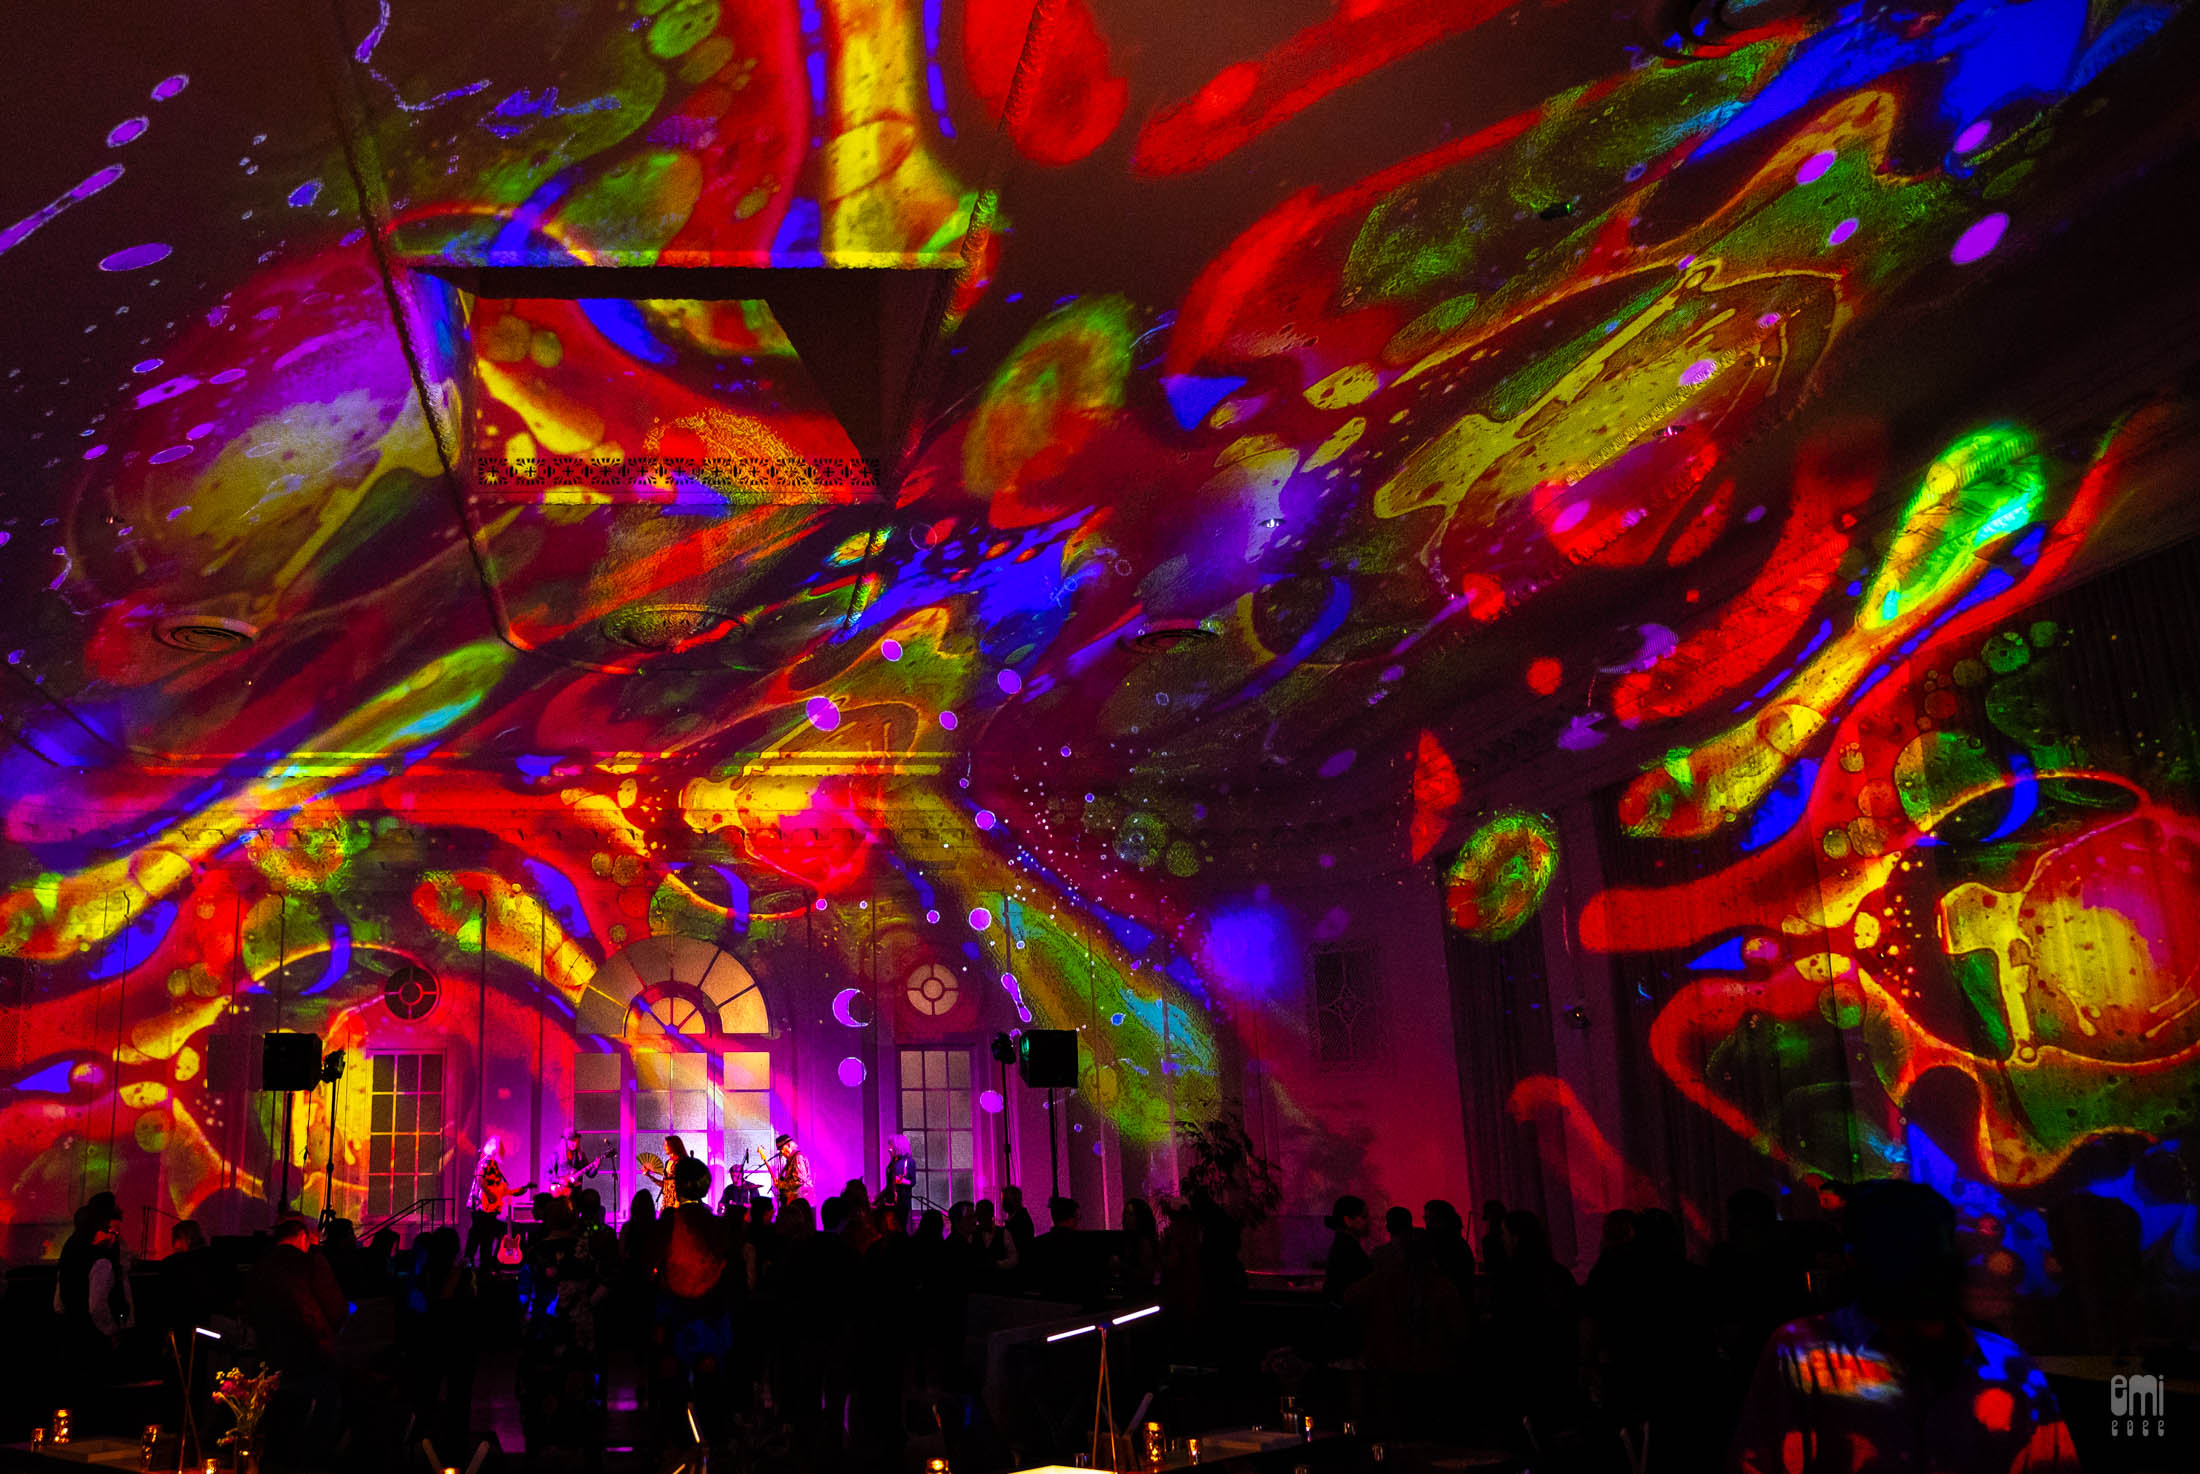 20221117 A corporate event - Big Brother and the Holding Company with Mad Alchemy Liquid Light Show at former Avalon Ballroom San Francisco. photo by emi